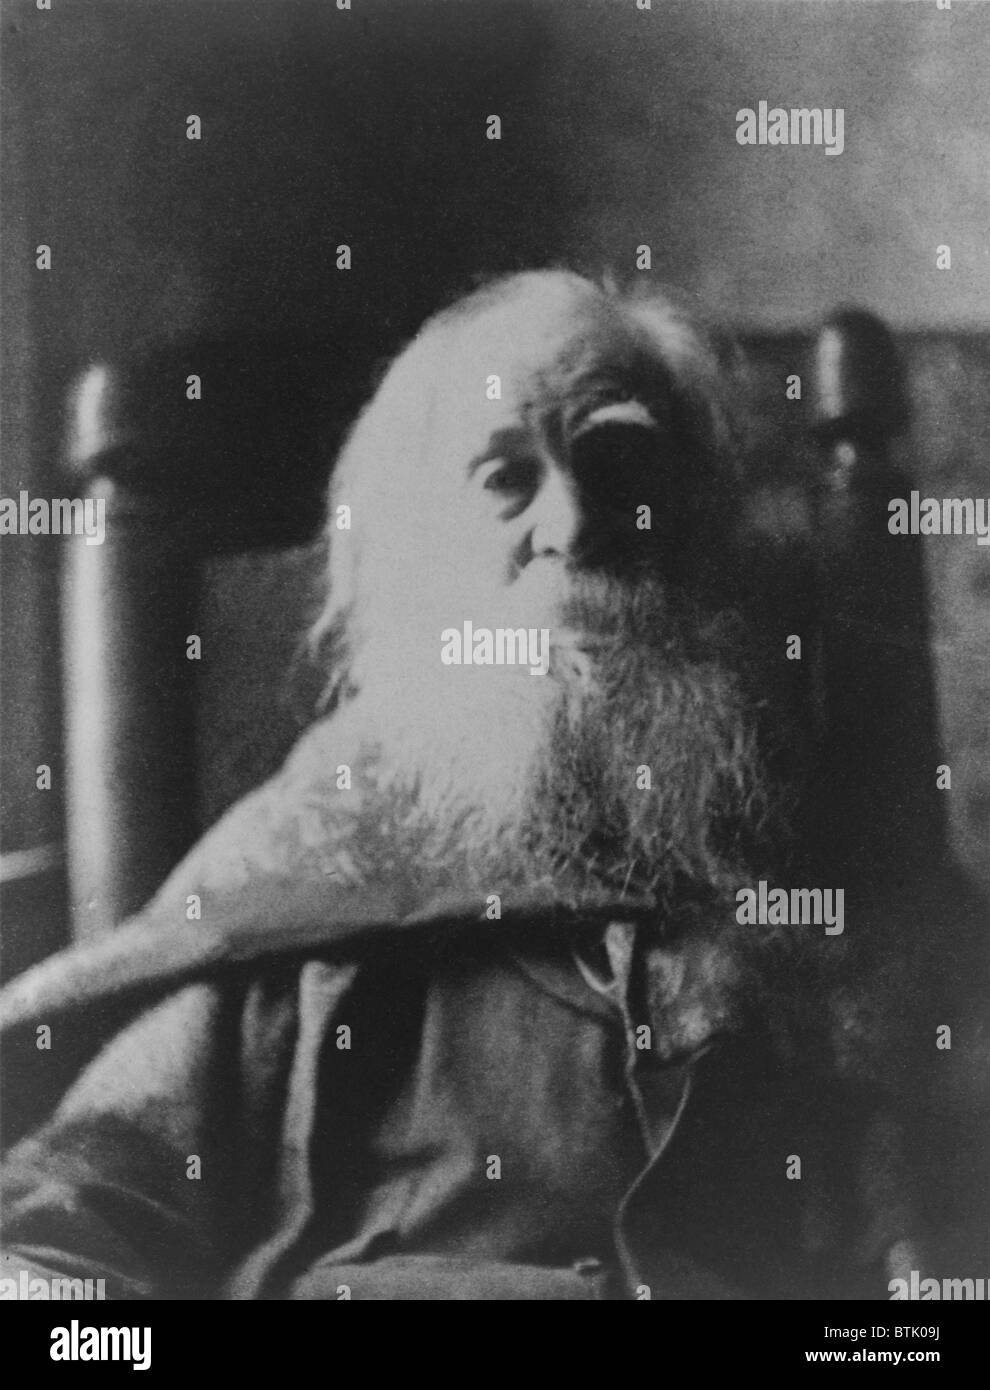 Walt Whitman (1819-1892) American poet, in 1991, the last year of his life. Photo by American painter, Thomas Eakins. Stock Photo